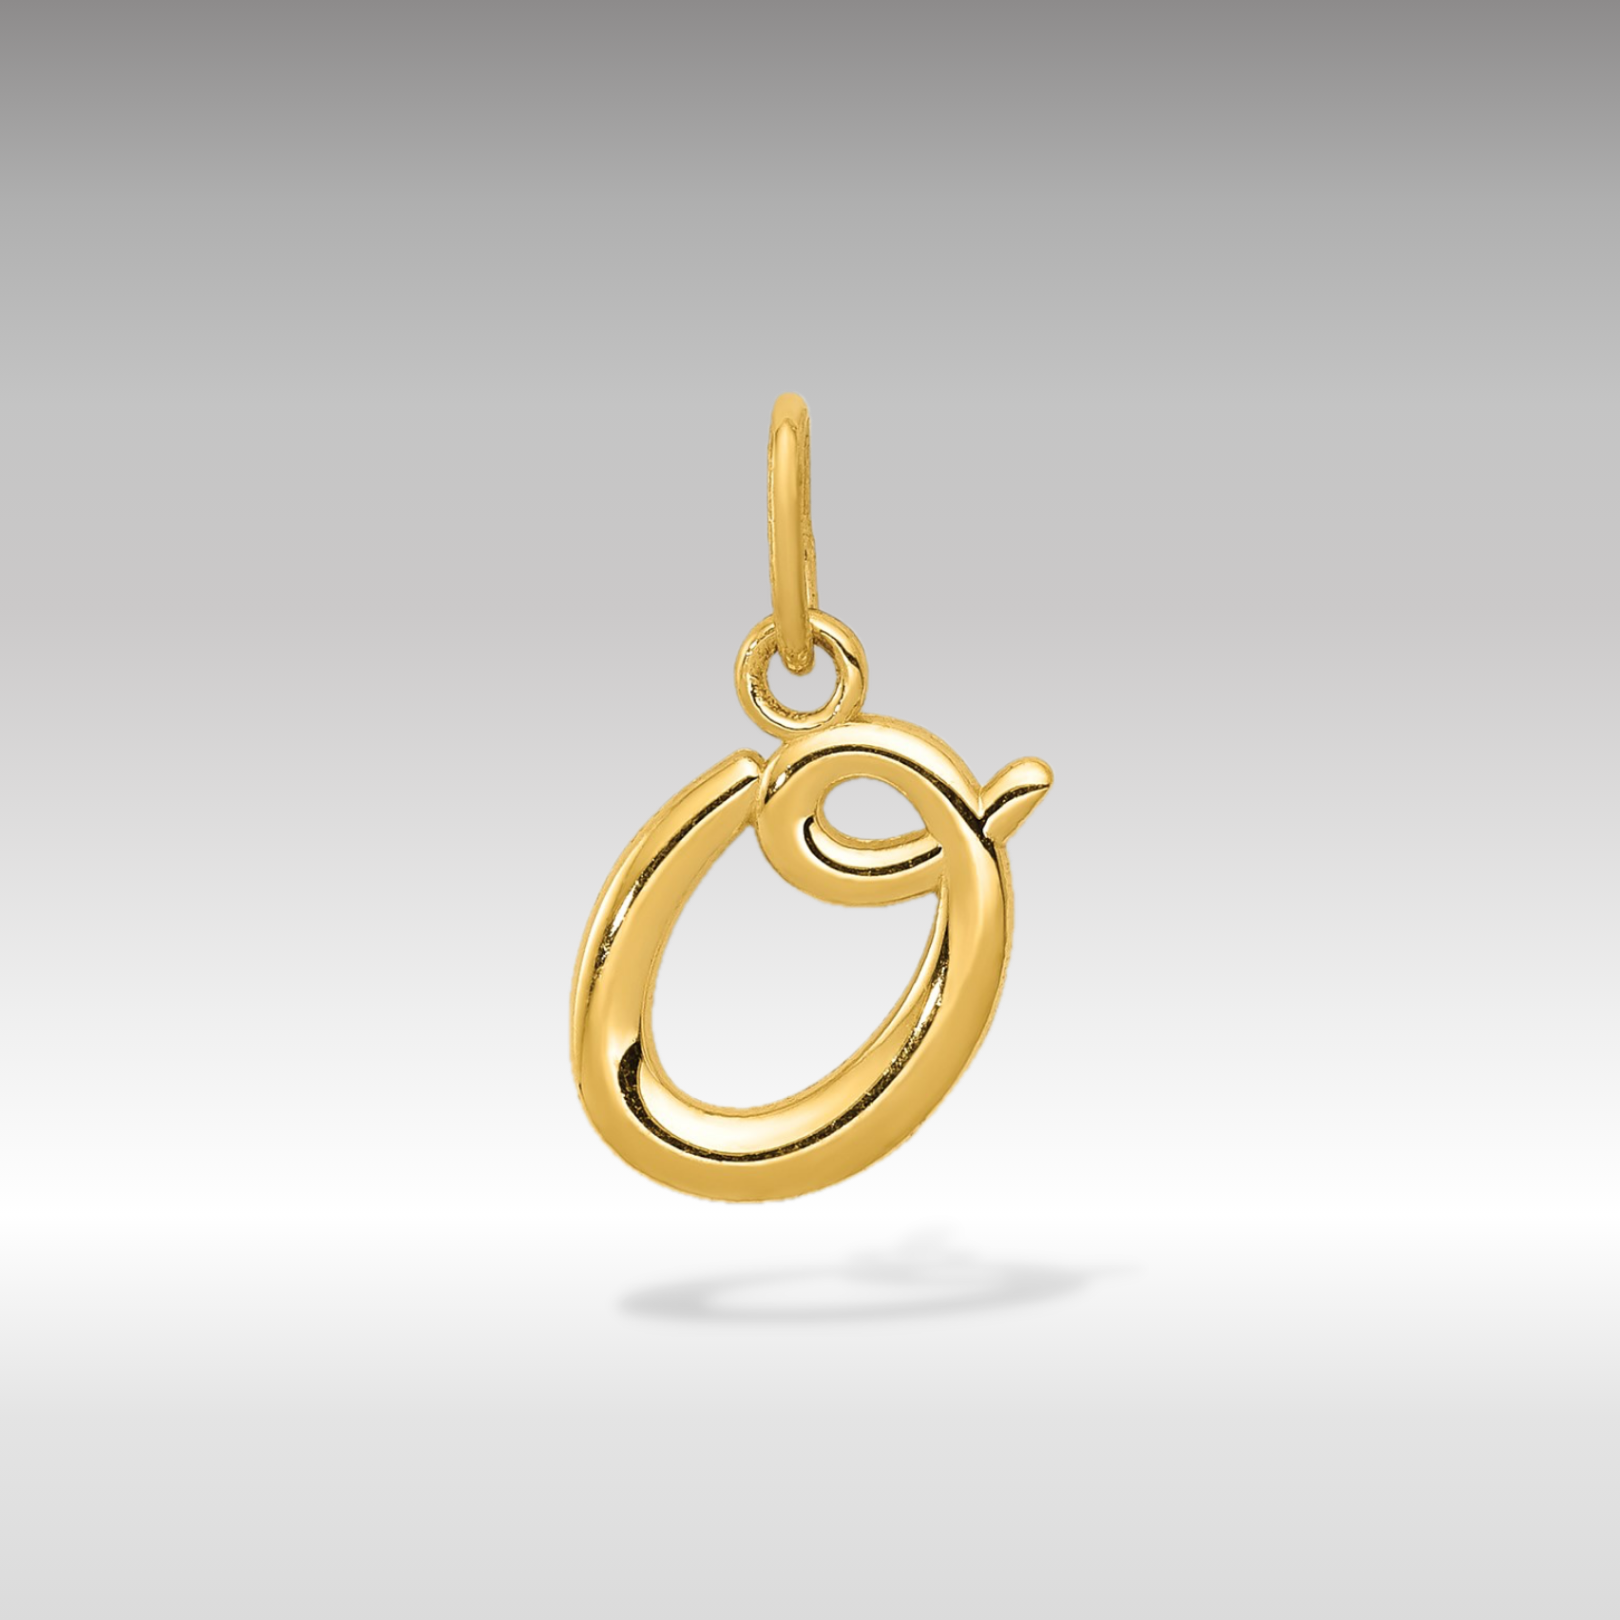 14K Gold Lowercase Initial "o" Pendant - Charlie & Co. Jewelry